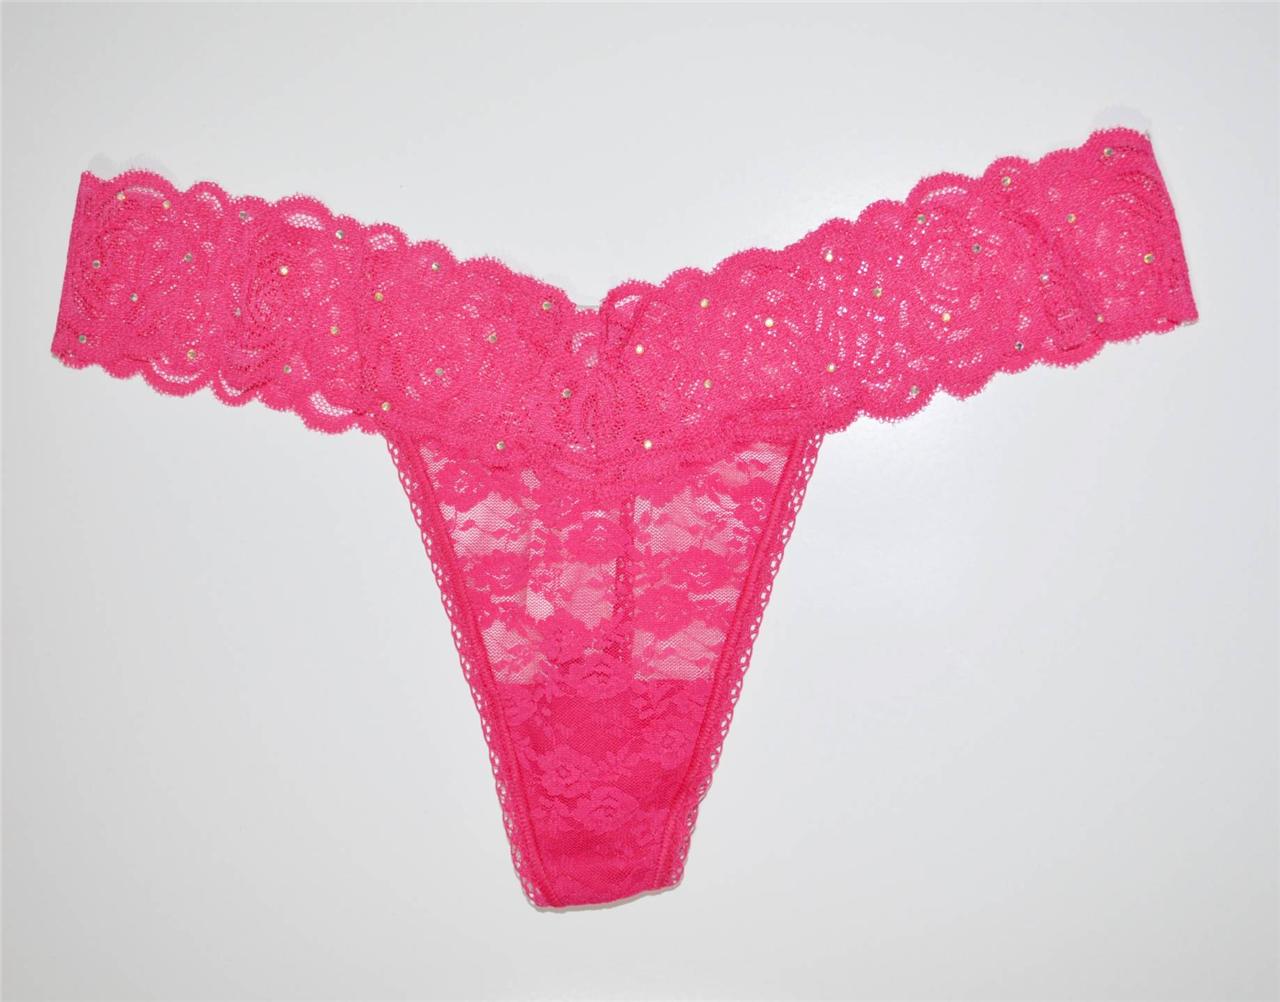 Victoria's Secret PINK All-over Lace Thong Panty | eBay